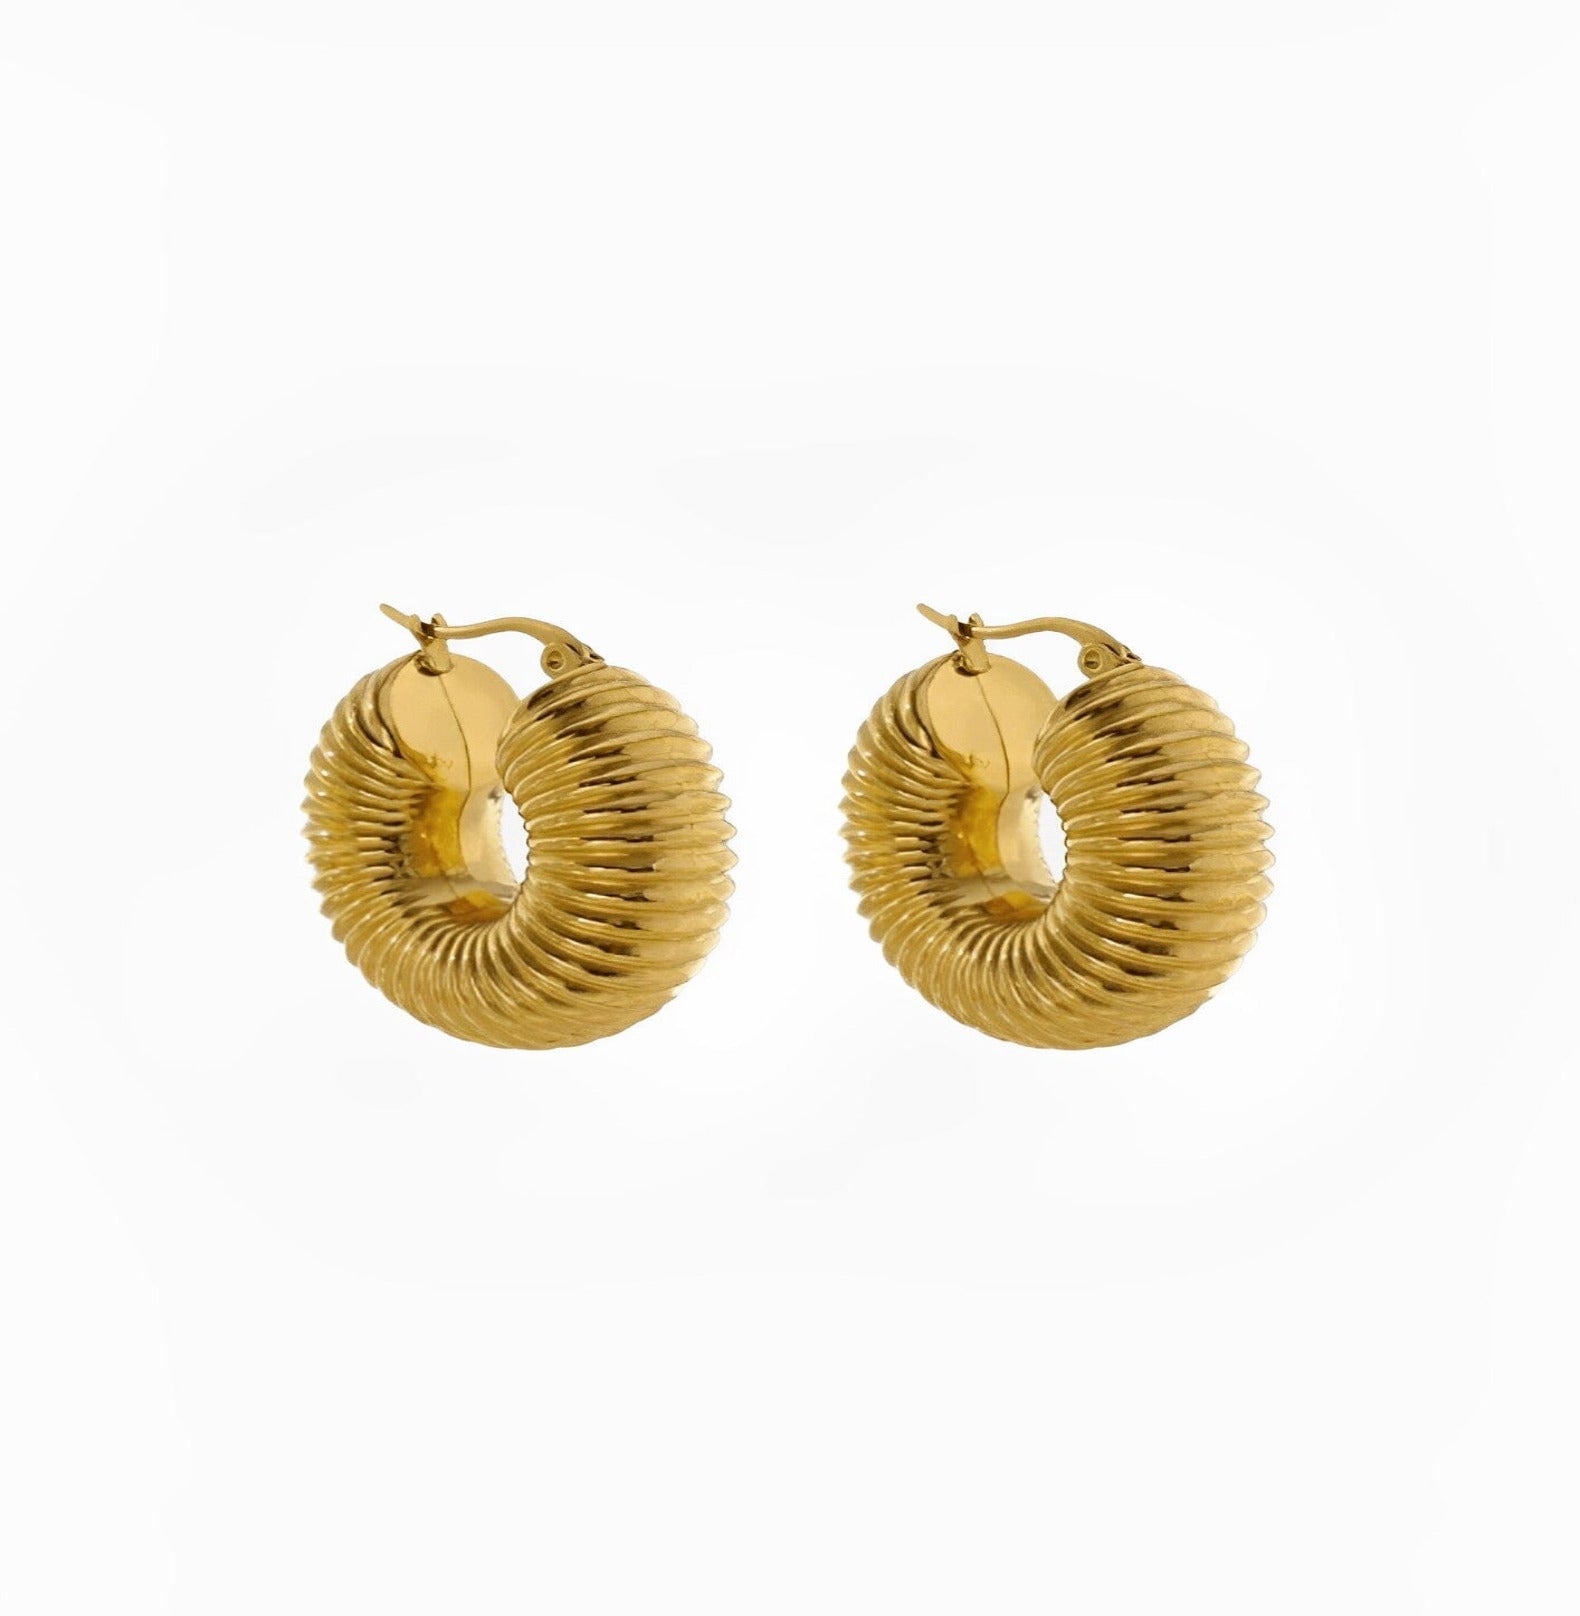 AVGO EARRINGS earing Yubama Jewelry Online Store - The Elegant Designs of Gold and Silver ! 